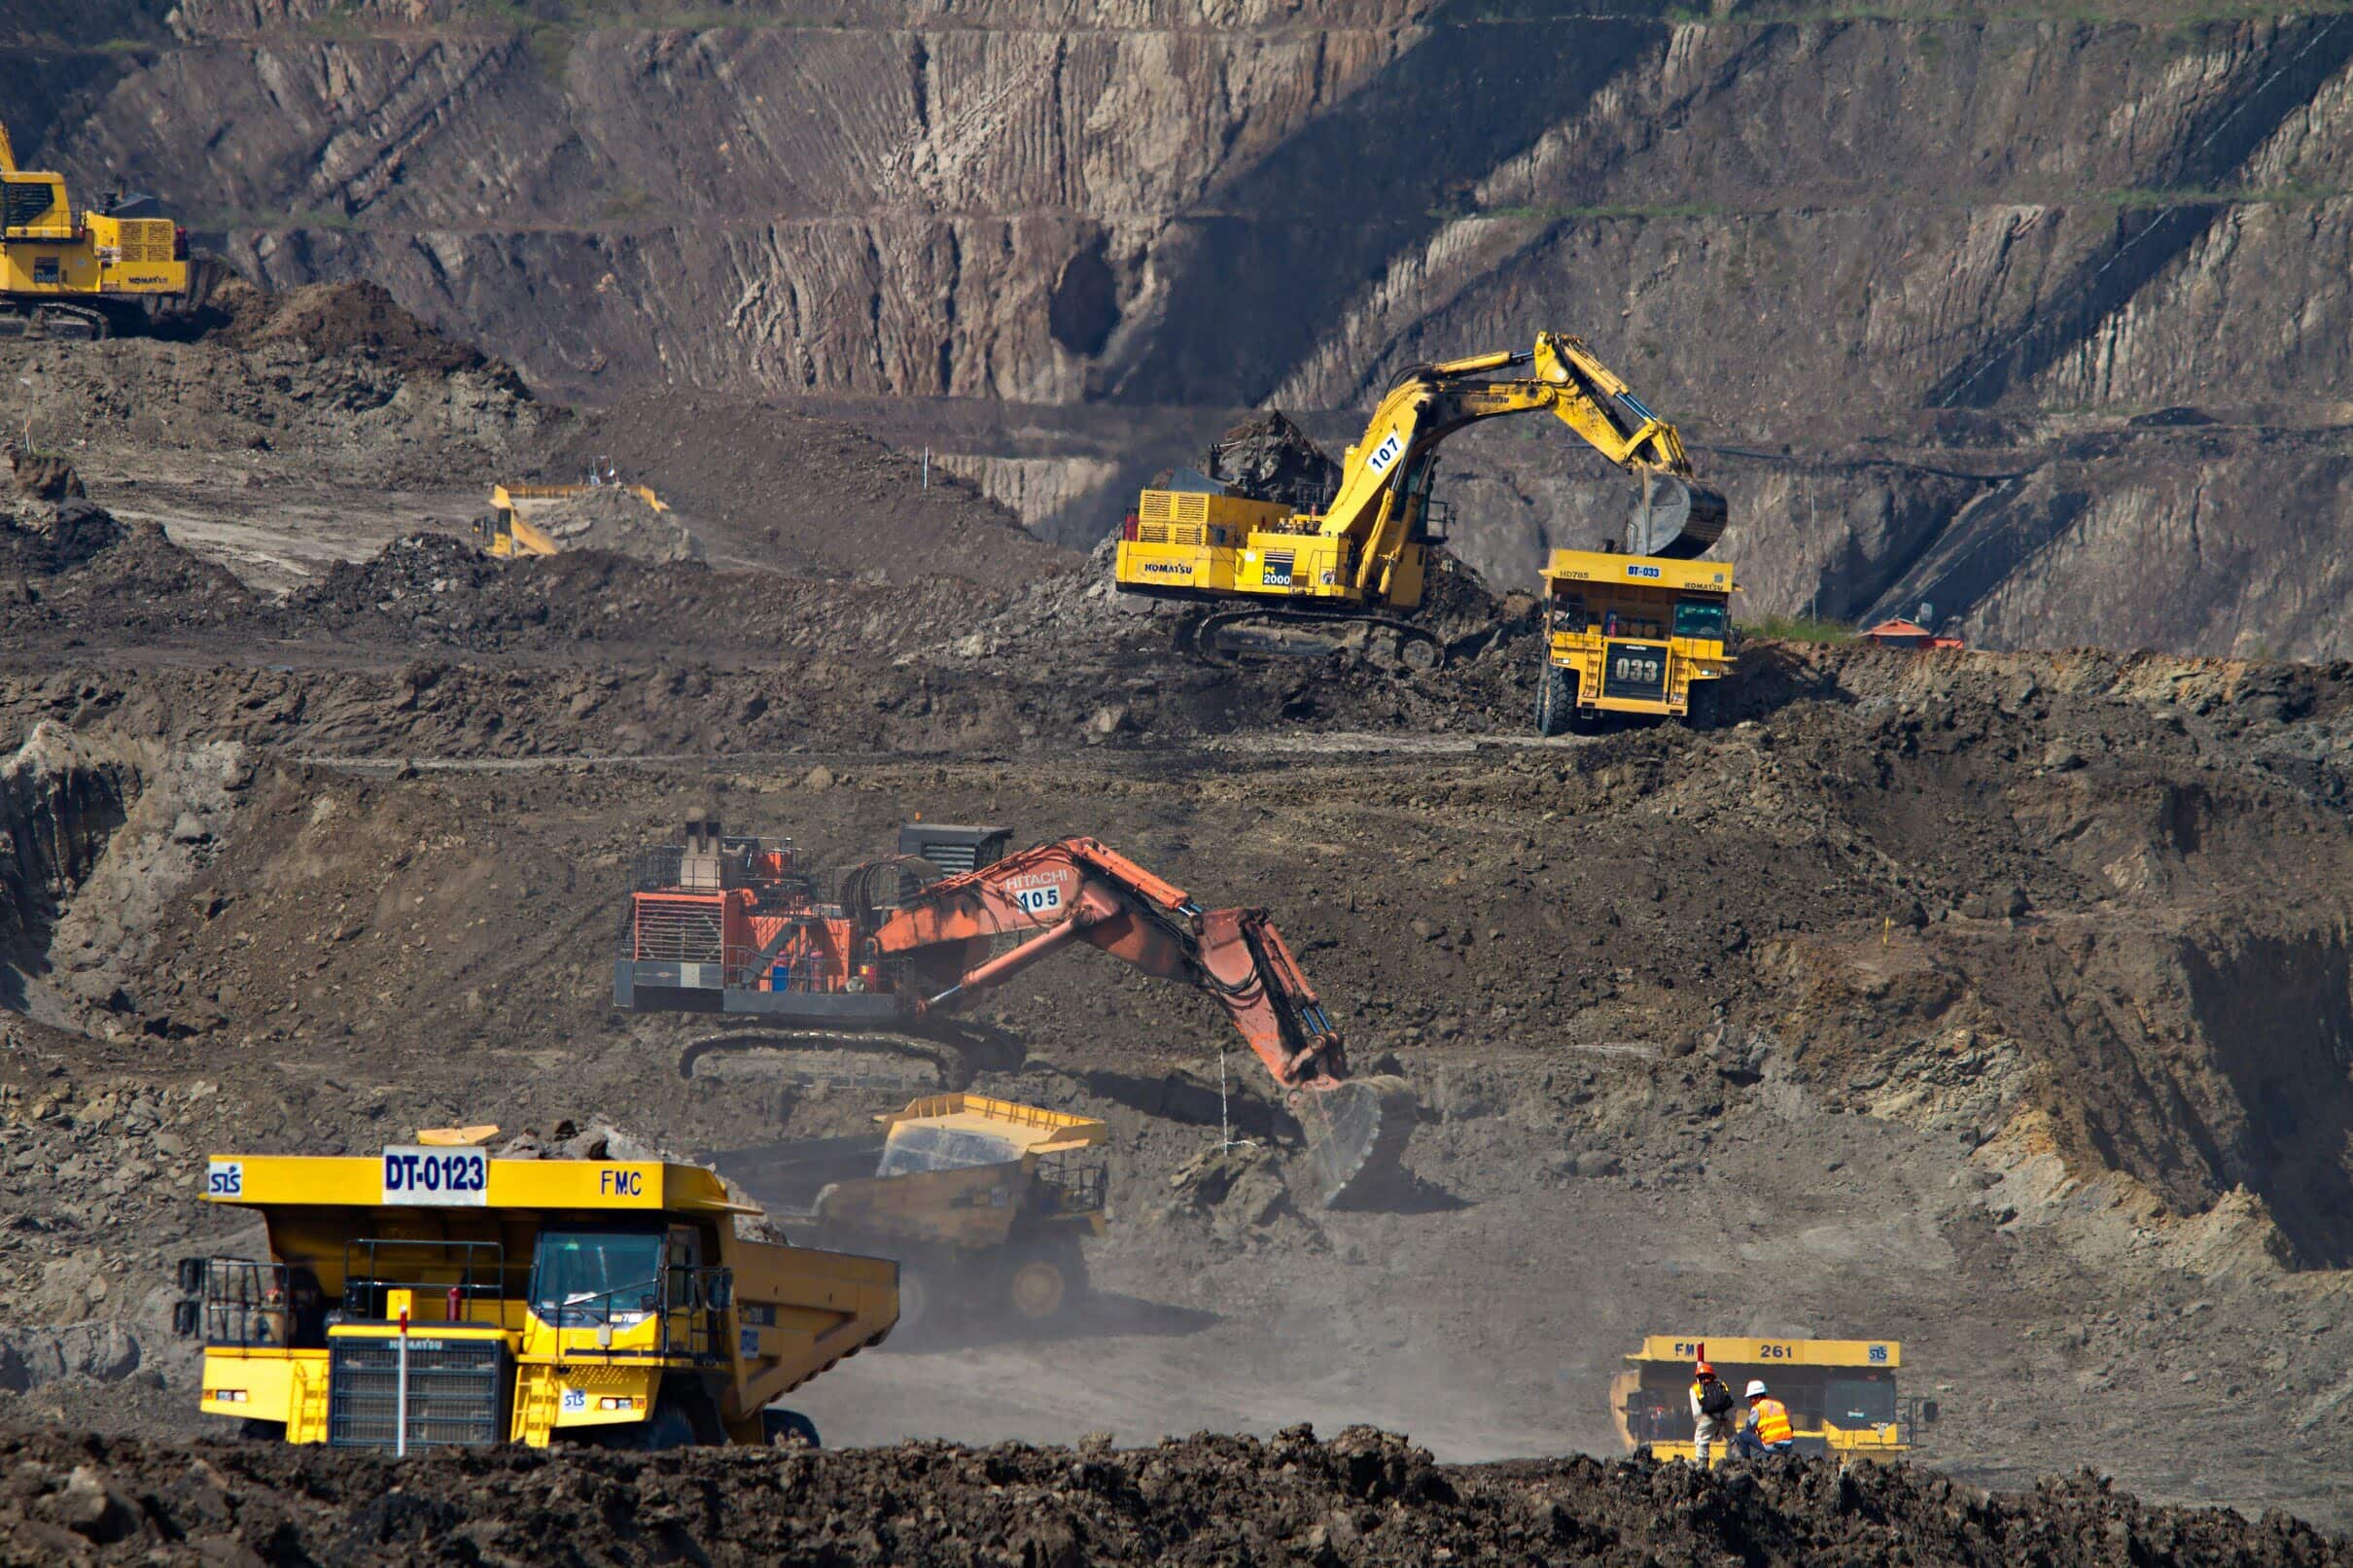 Heavy Machinery Excavating Coal - Industrial Mining Operation